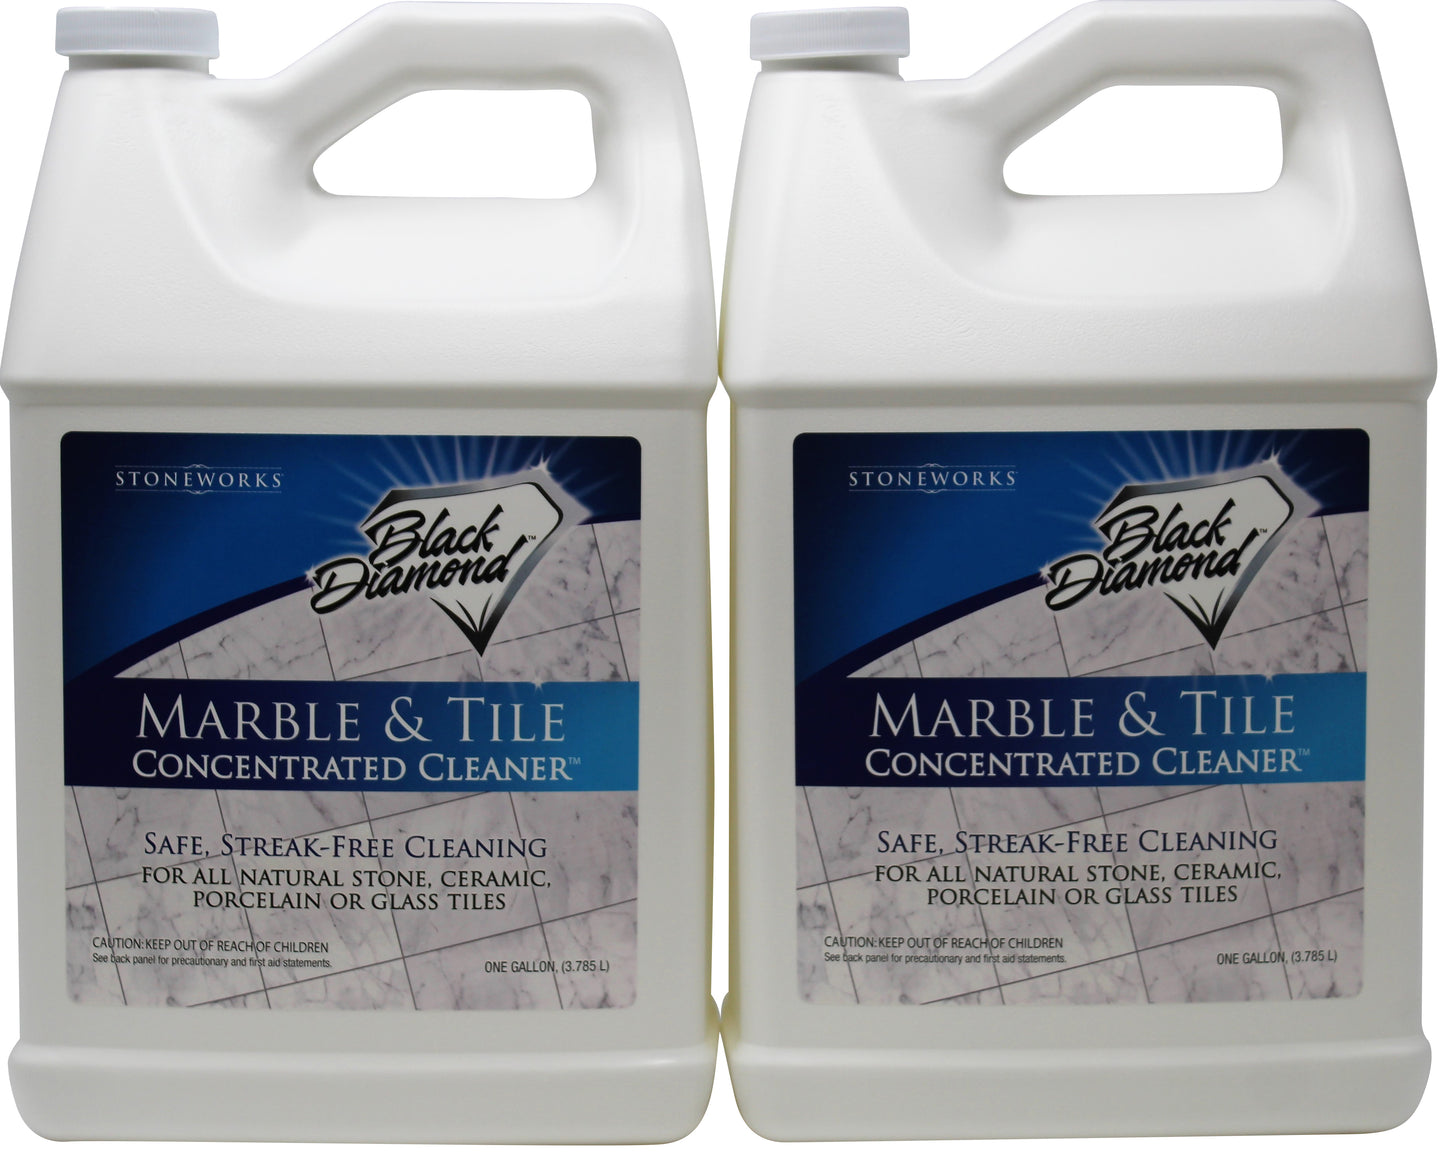 Black Diamond Stoneworks MARBLE & TILE FLOOR CLEANER. Great for Ceramic, Porcelain, Granite, Natural Stone, Vinyl and Brick. No-rinse Concentrate.